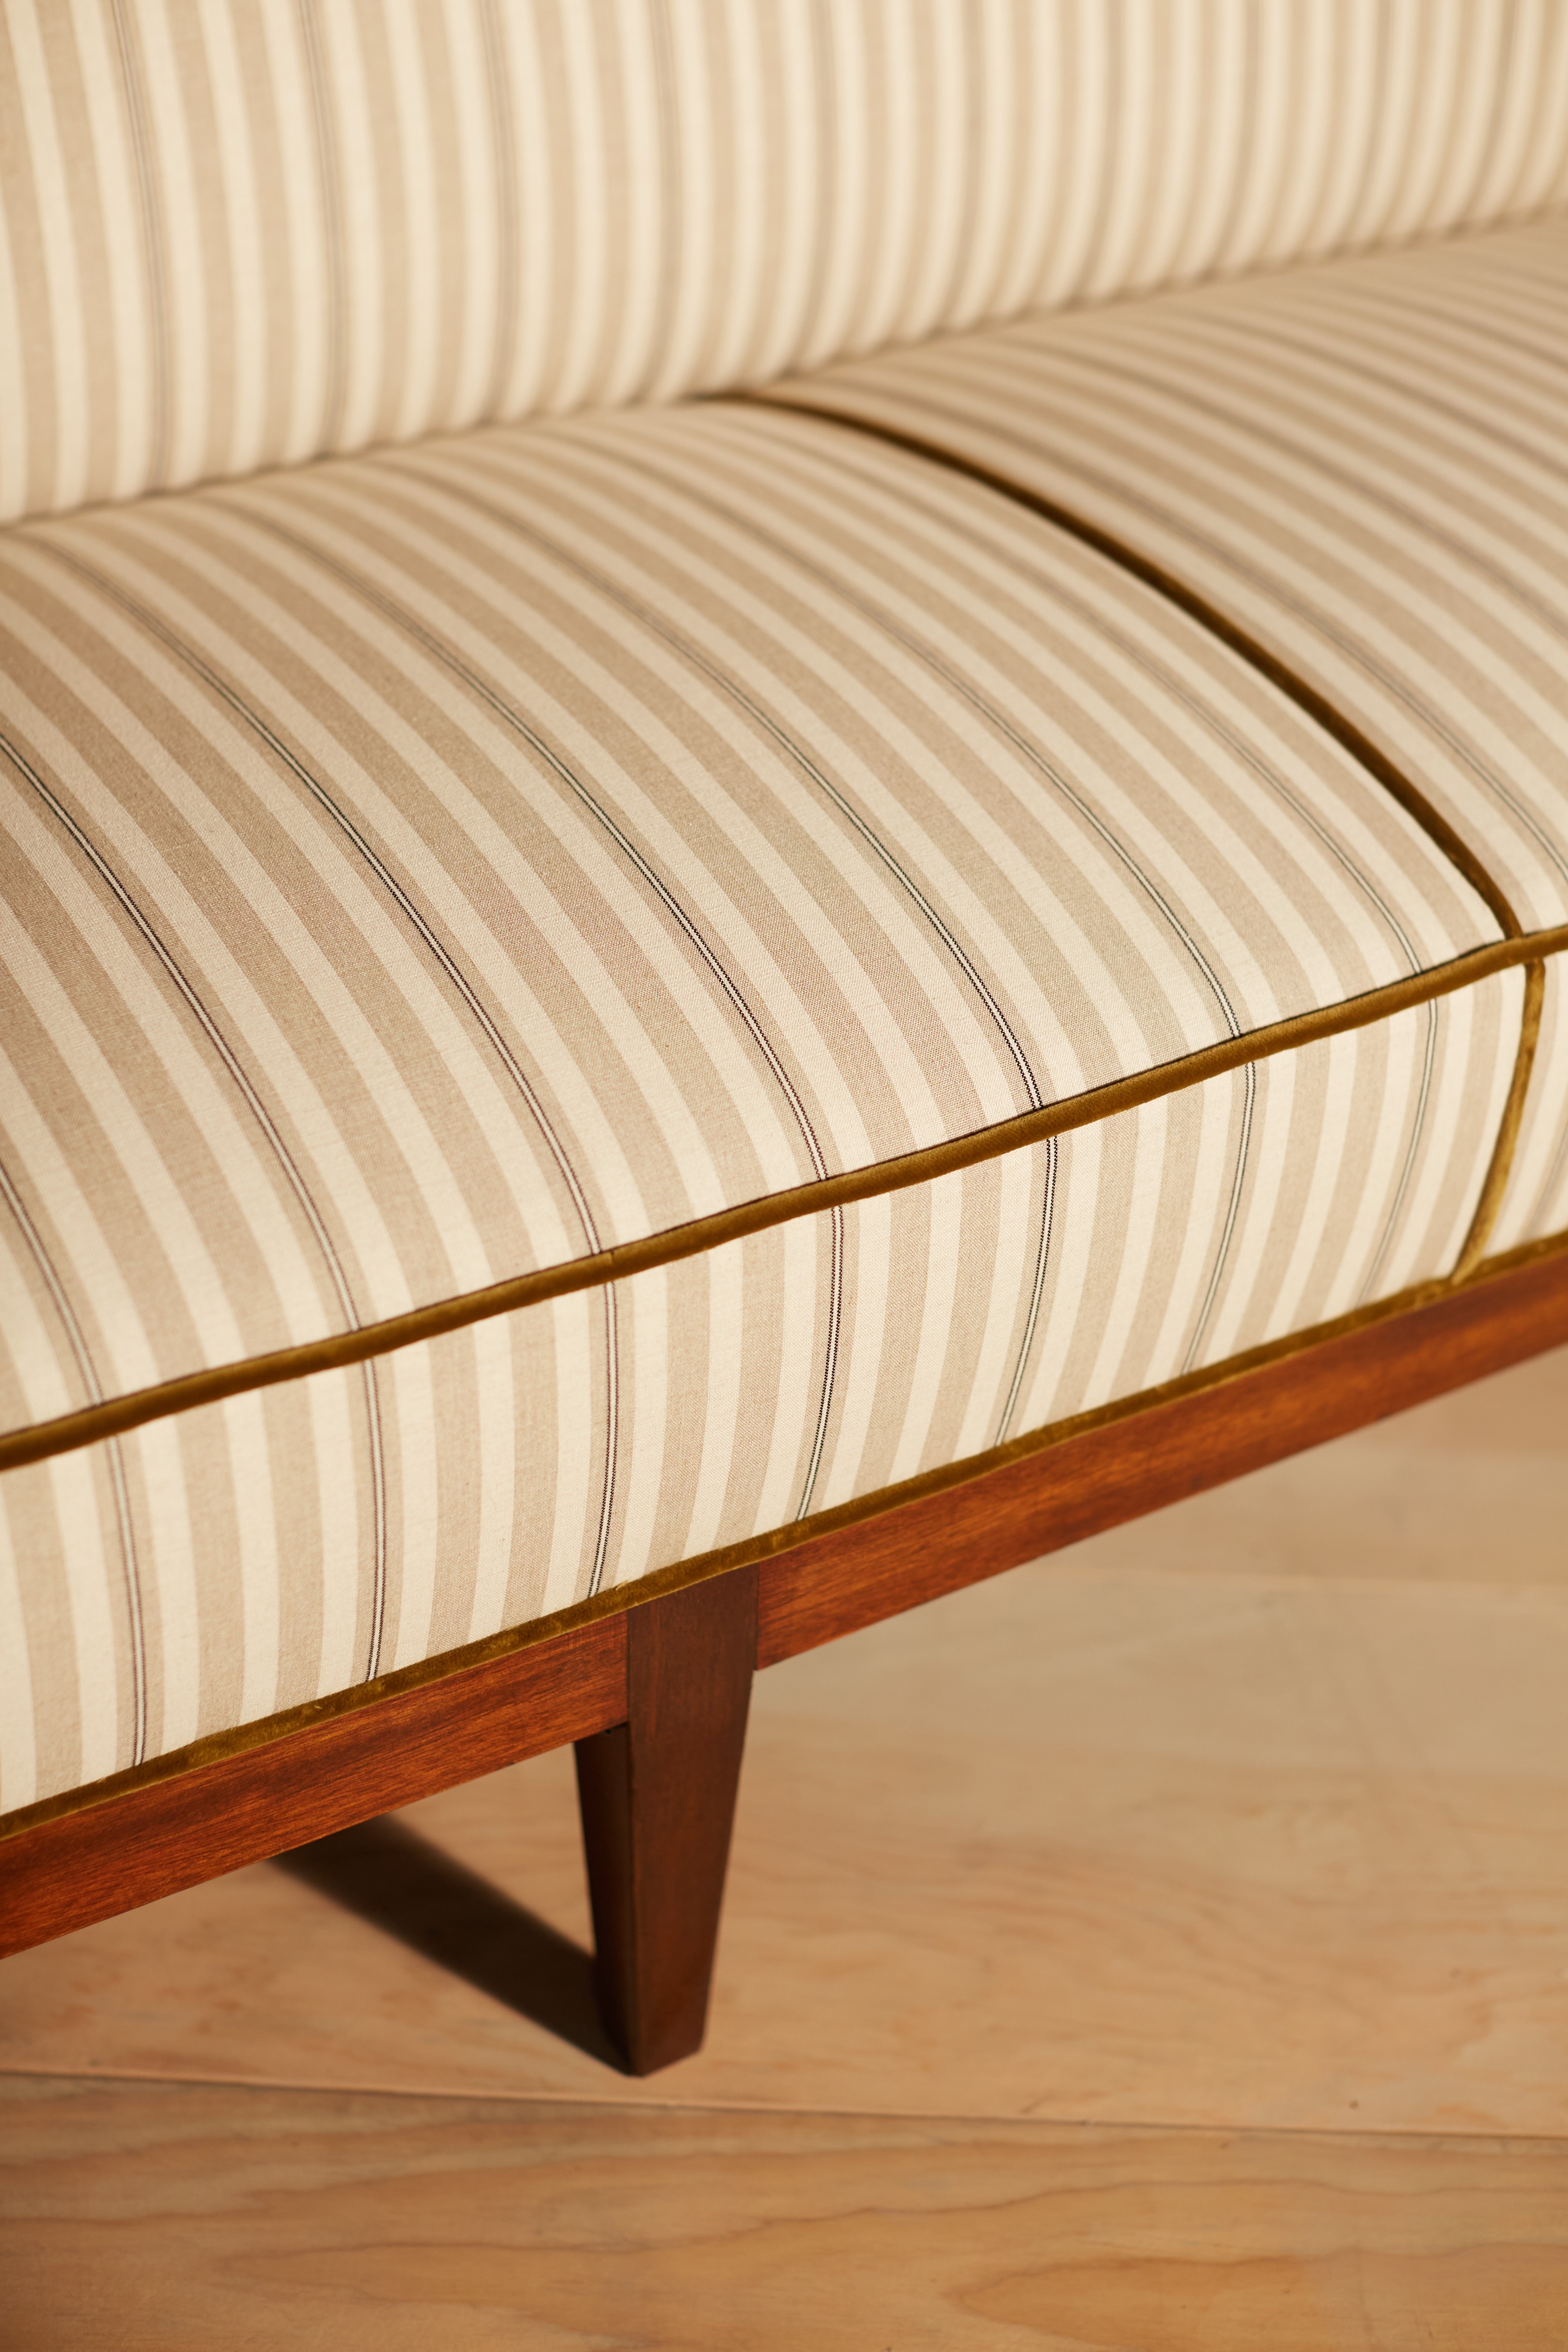 a close up of a striped bench on a wooden floor